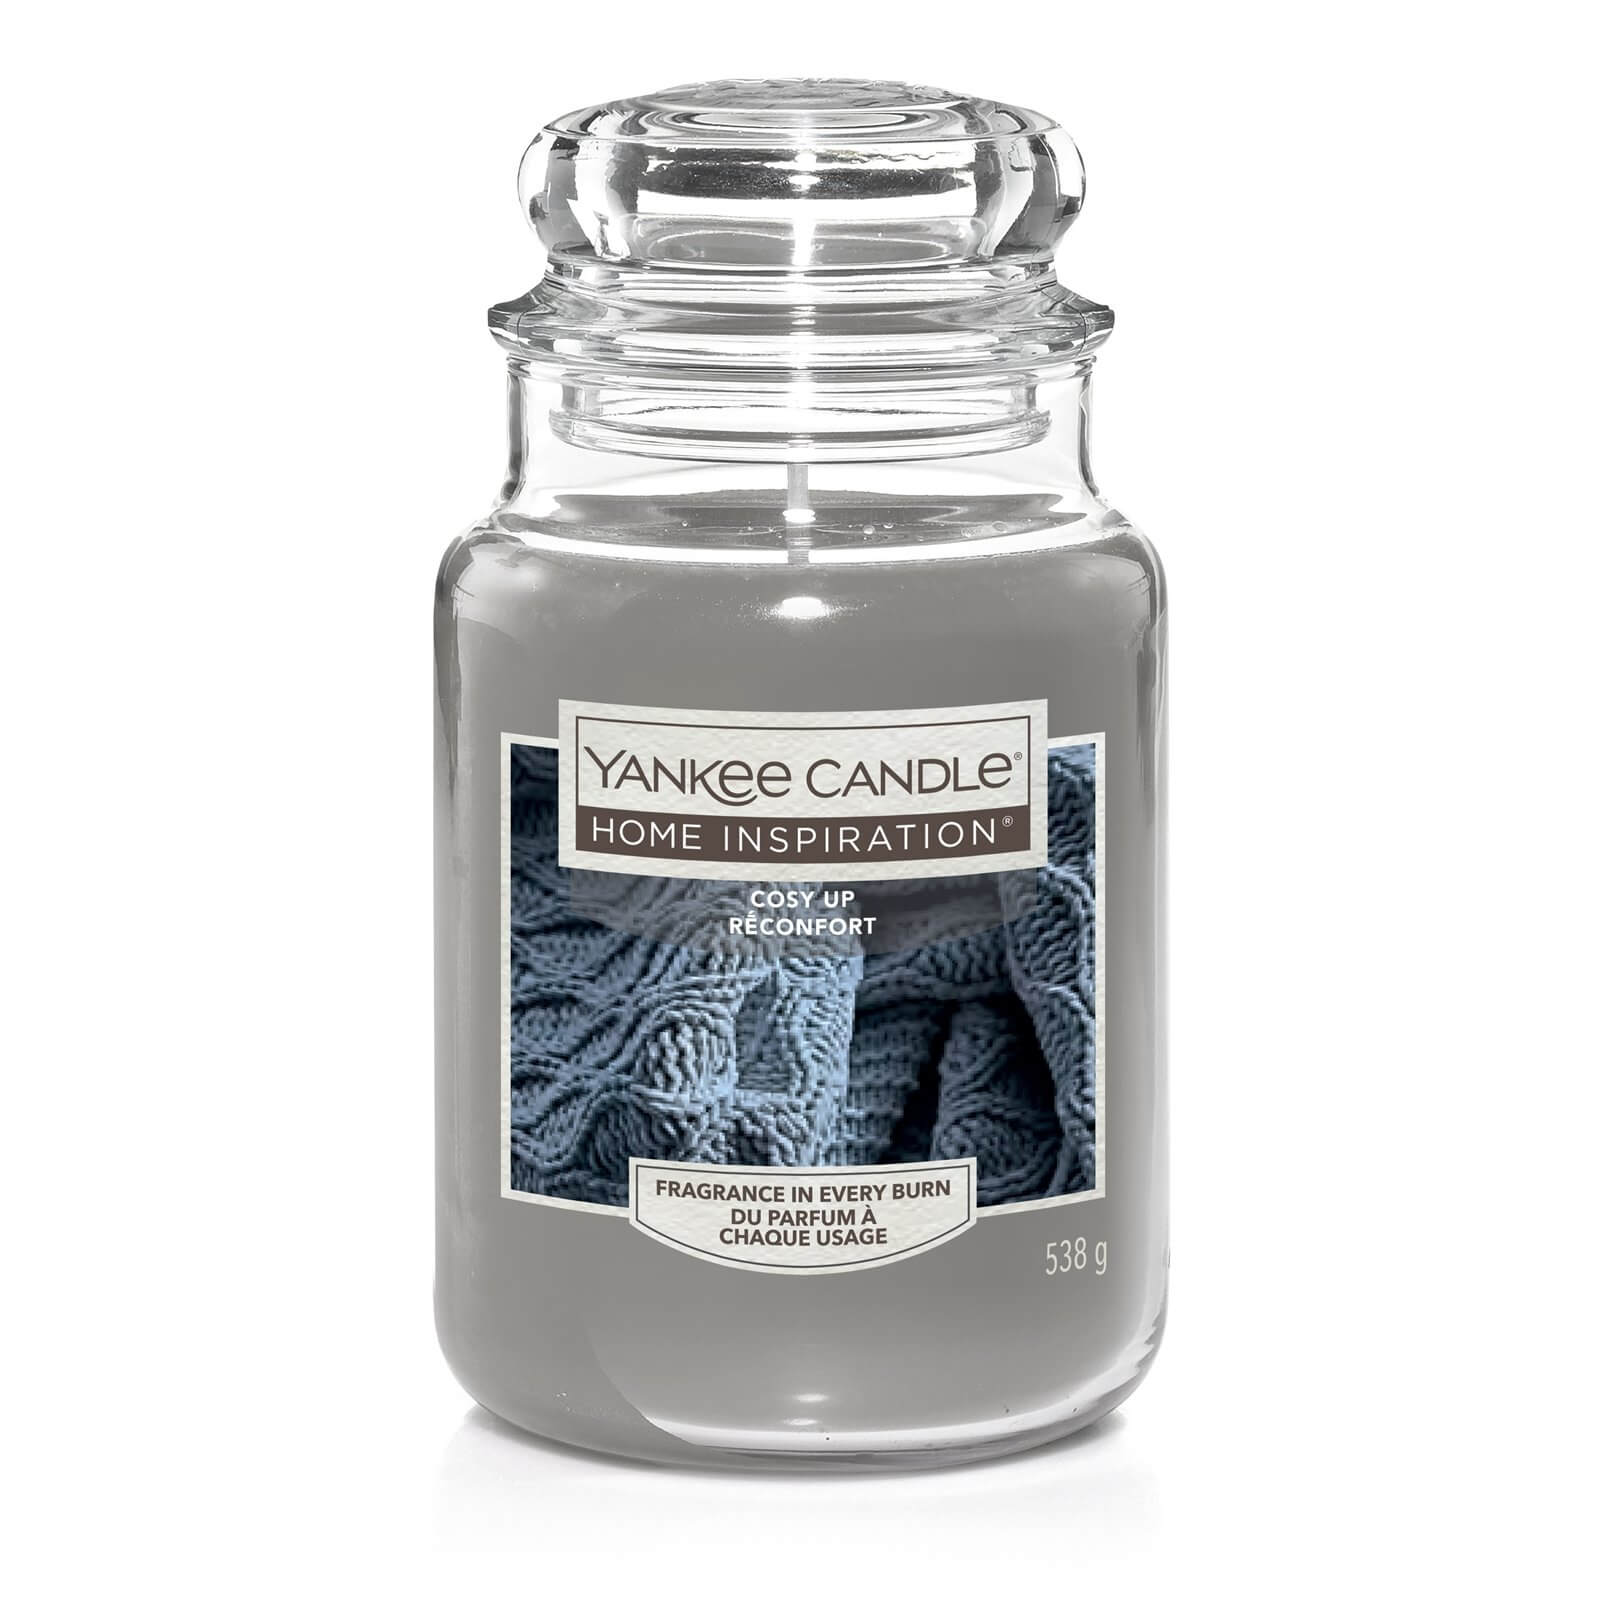 Yankee Candle Home Inspiration Scented Candle - Large Jar - Cosy Up